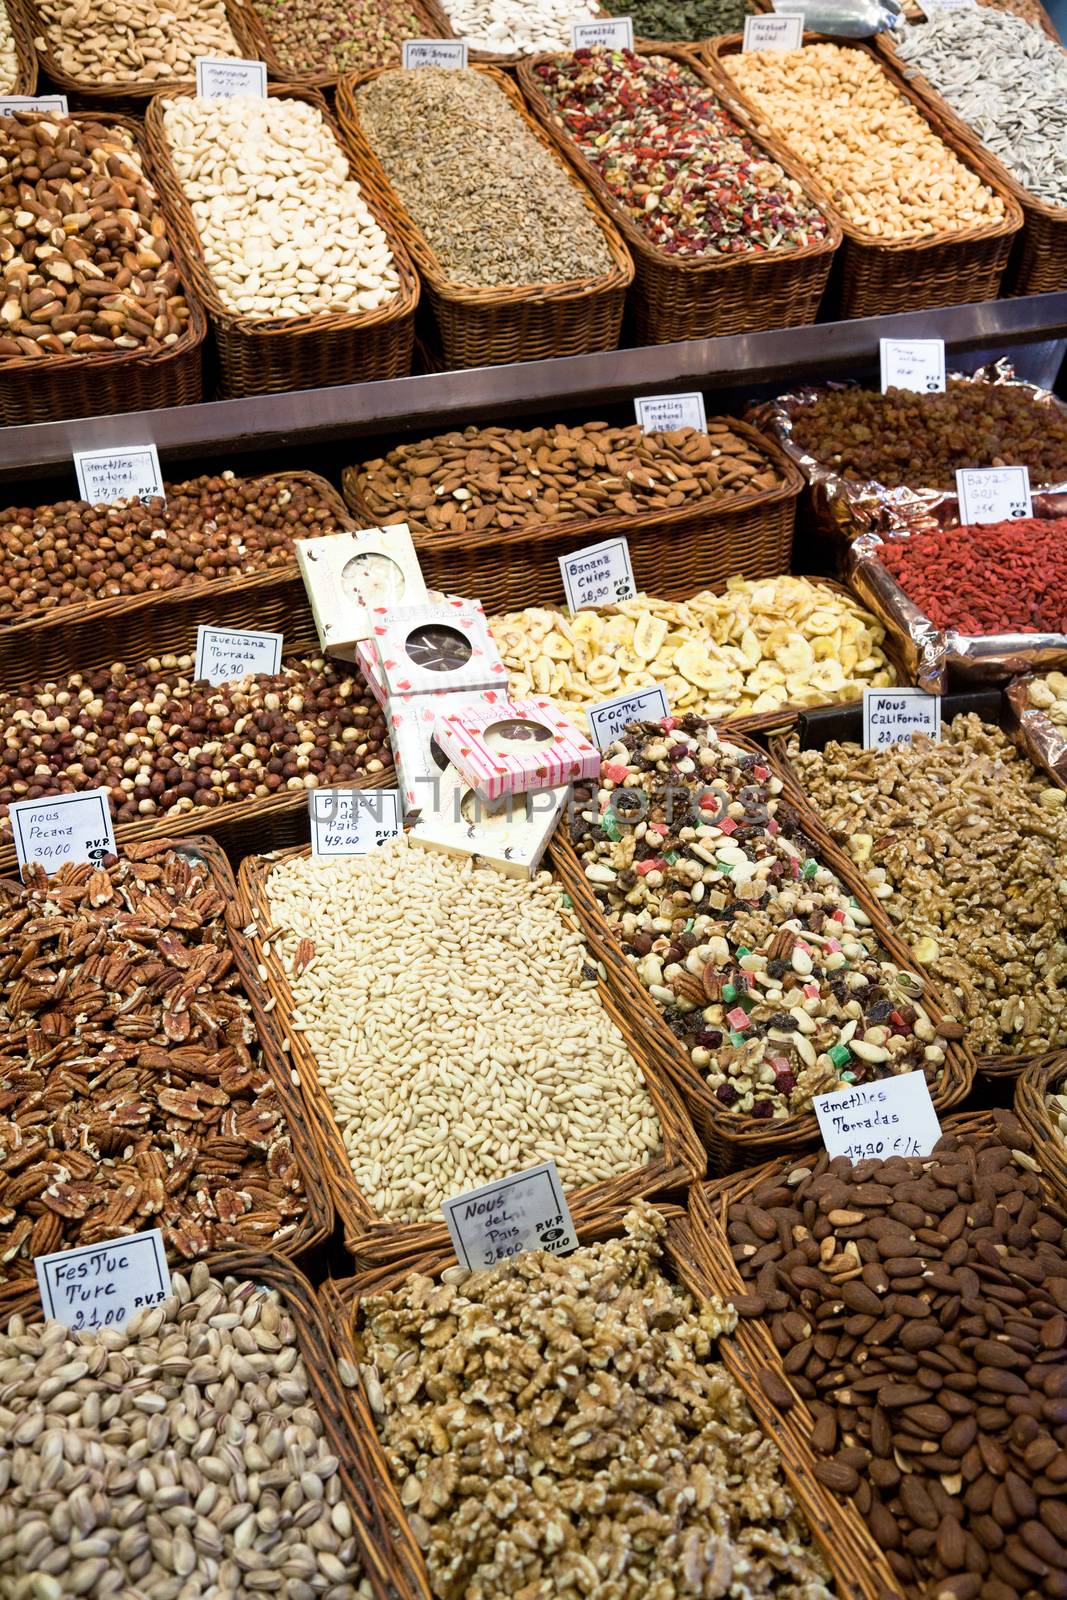 BARCELONA, SPAIN - APRIL 14: Famous La Boqueria market with nuts, chocolate delicacies, fruit jellies and dry fruits on April 14, 2012 in Barcelona, Spain. One of the oldest markets in Europe that still exist. Established 1217.